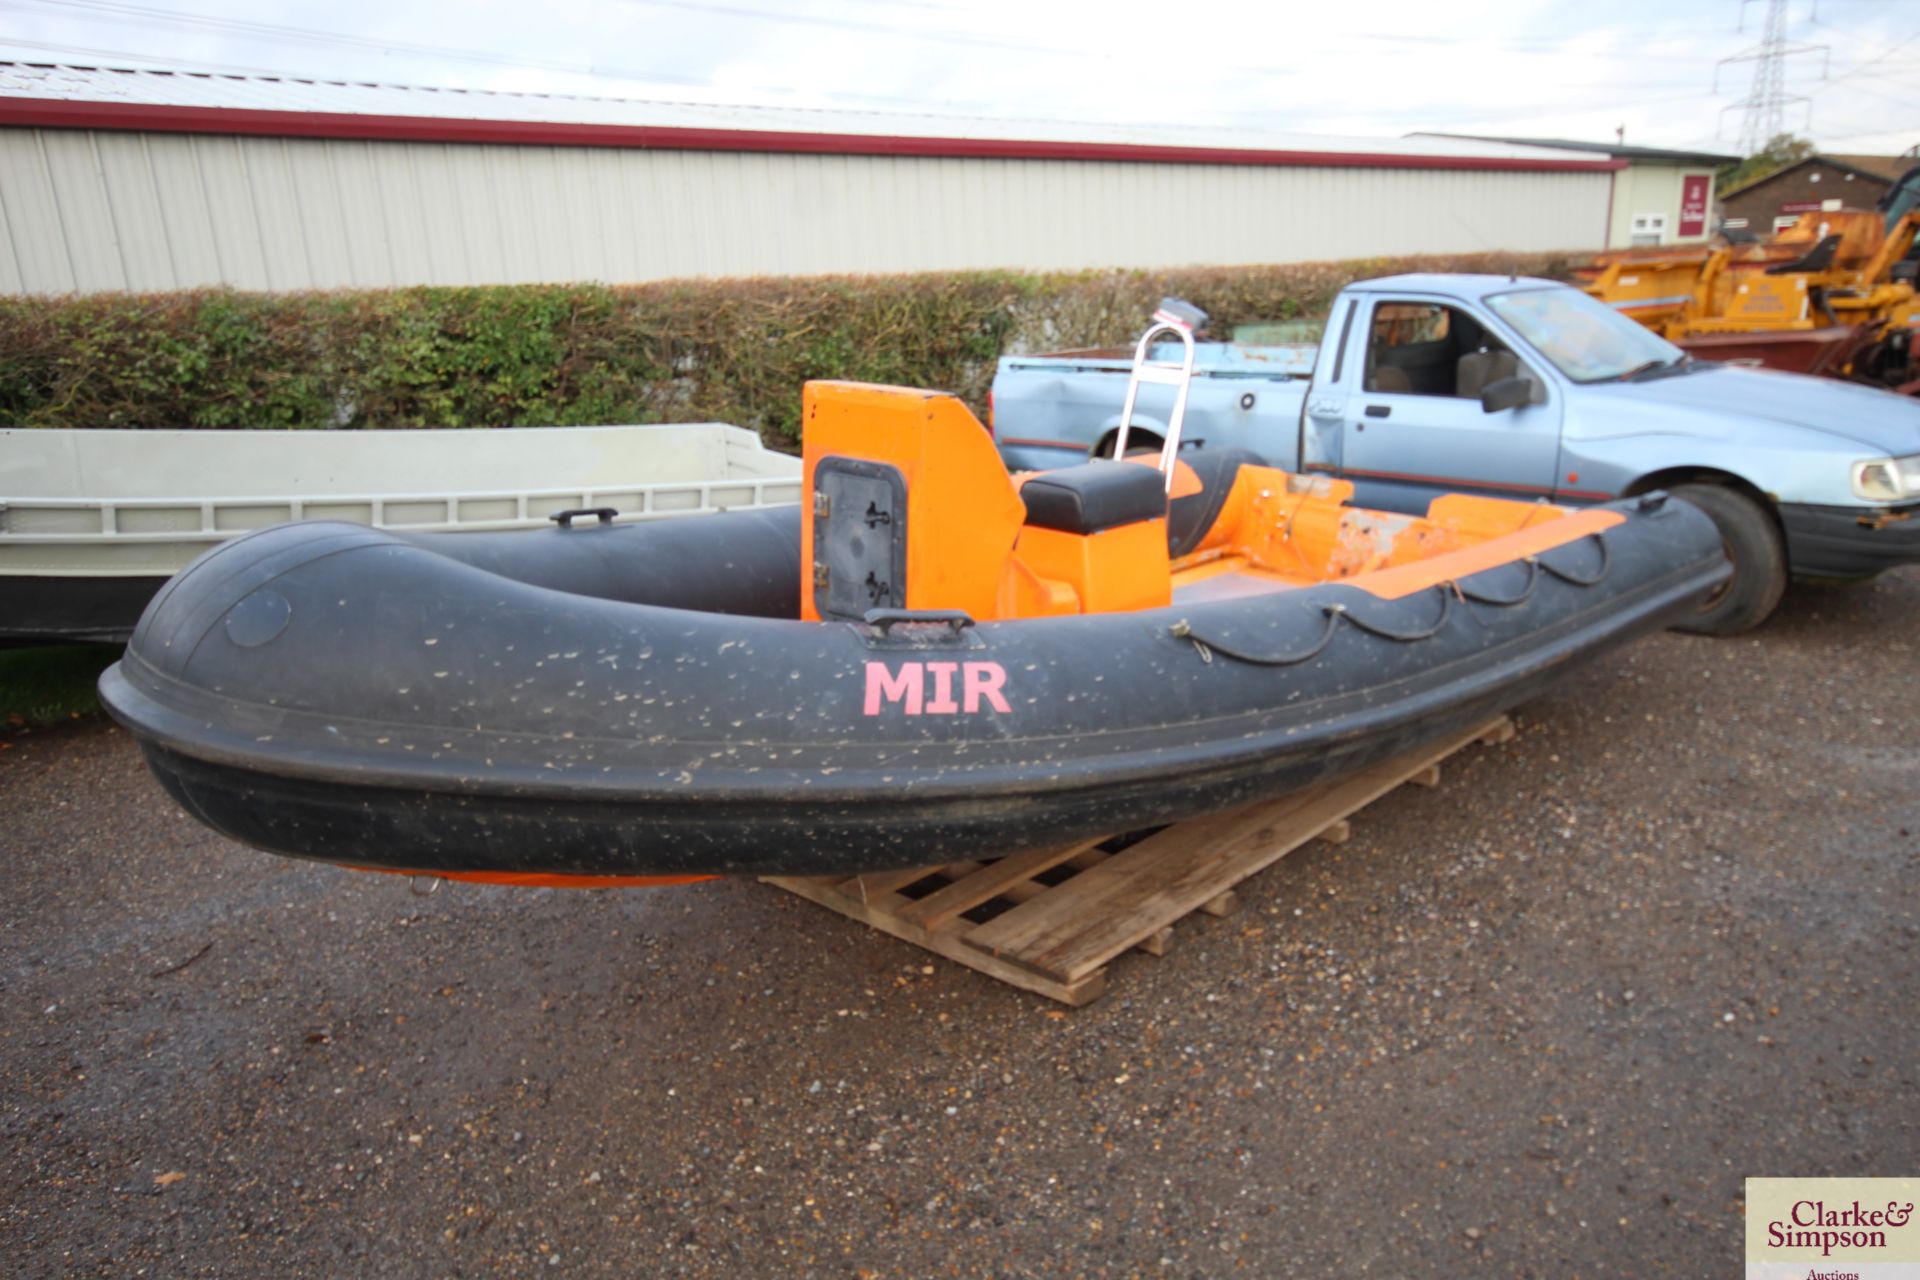 Mir 17ft rib. With fibreglass hull, consol and seat. No trailer, outboard or steering.